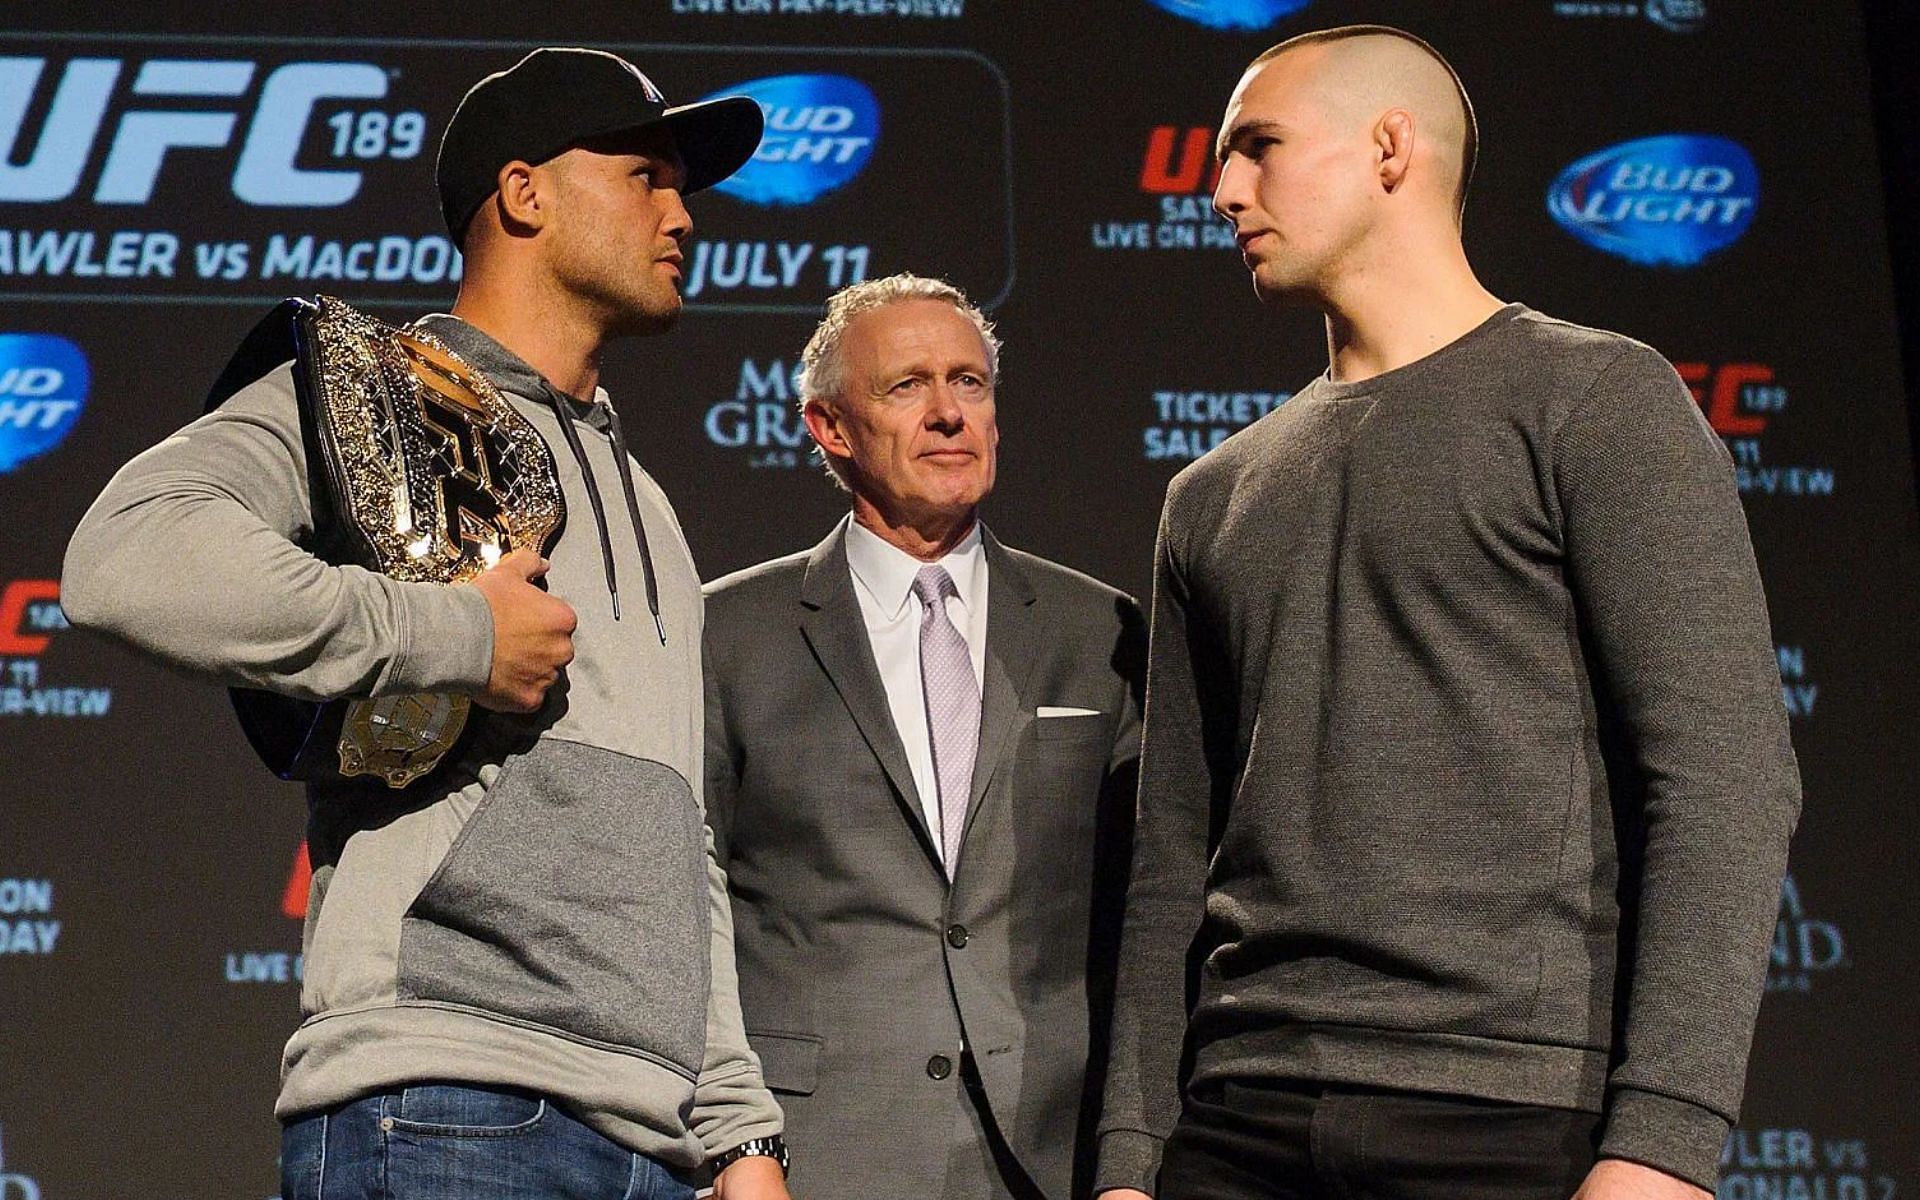 Robbie Lawler (L) and Rory MacDonald (R)